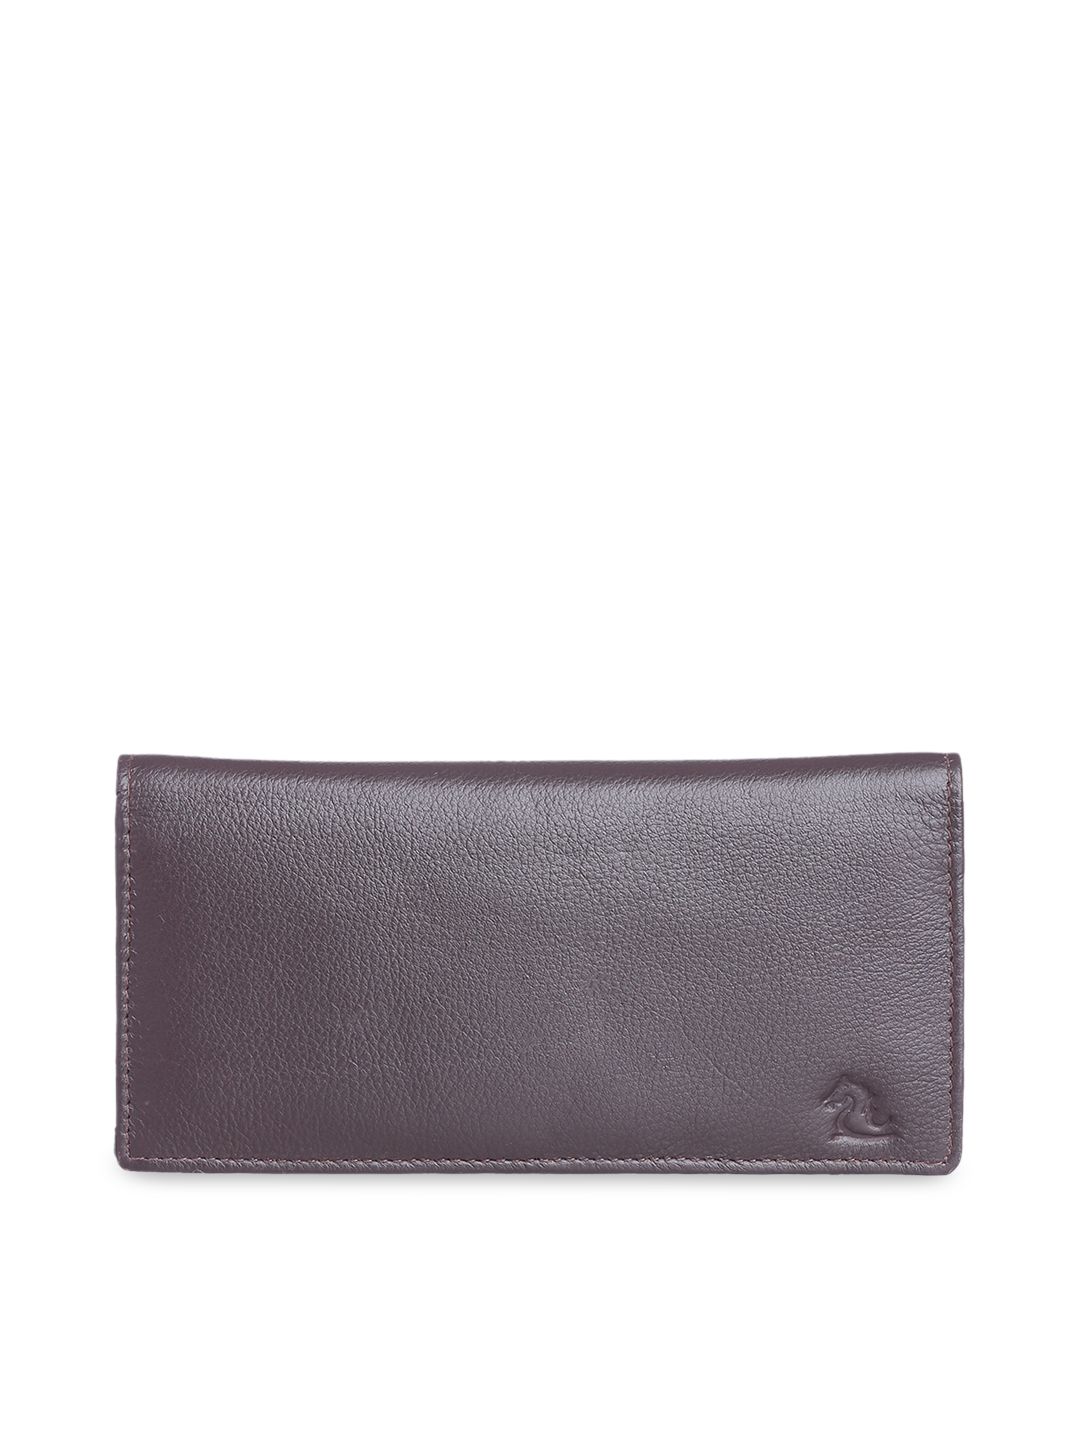 Kara Women Brown Leather Solid Two Fold Wallet Price in India